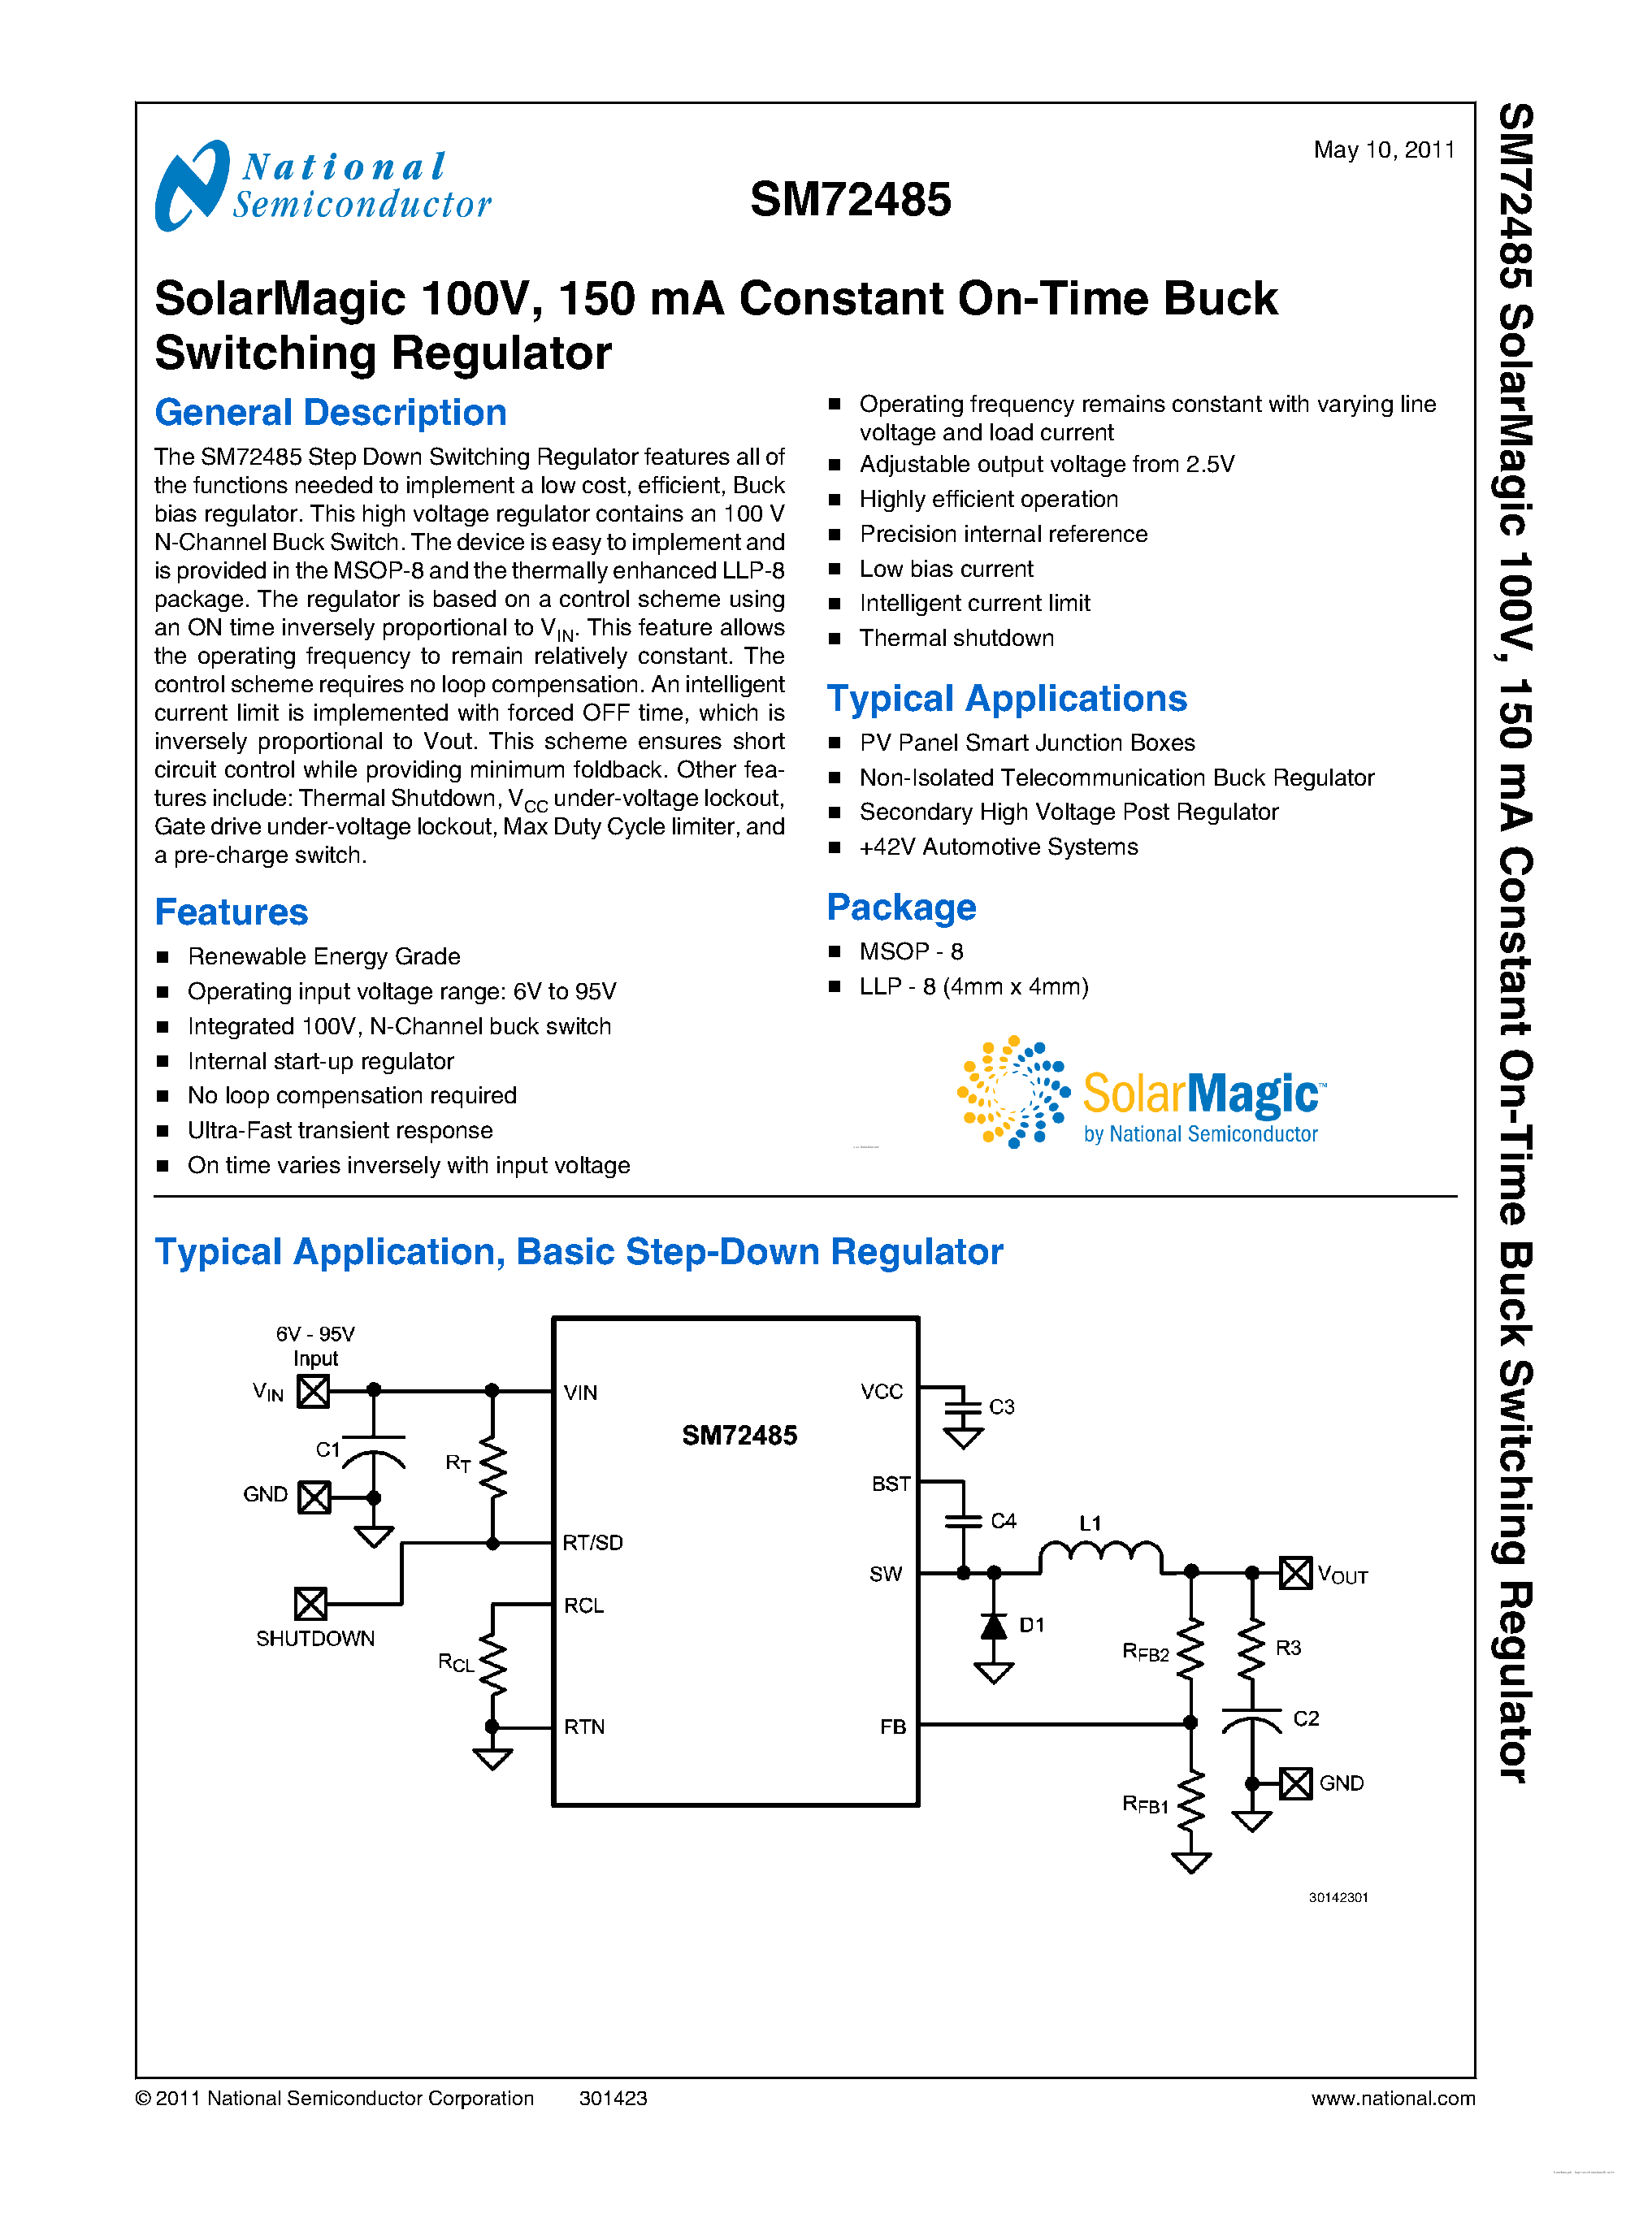 Datasheet SM72485 - 150 mA Constant On-Time Buck Switching Regulator page 1